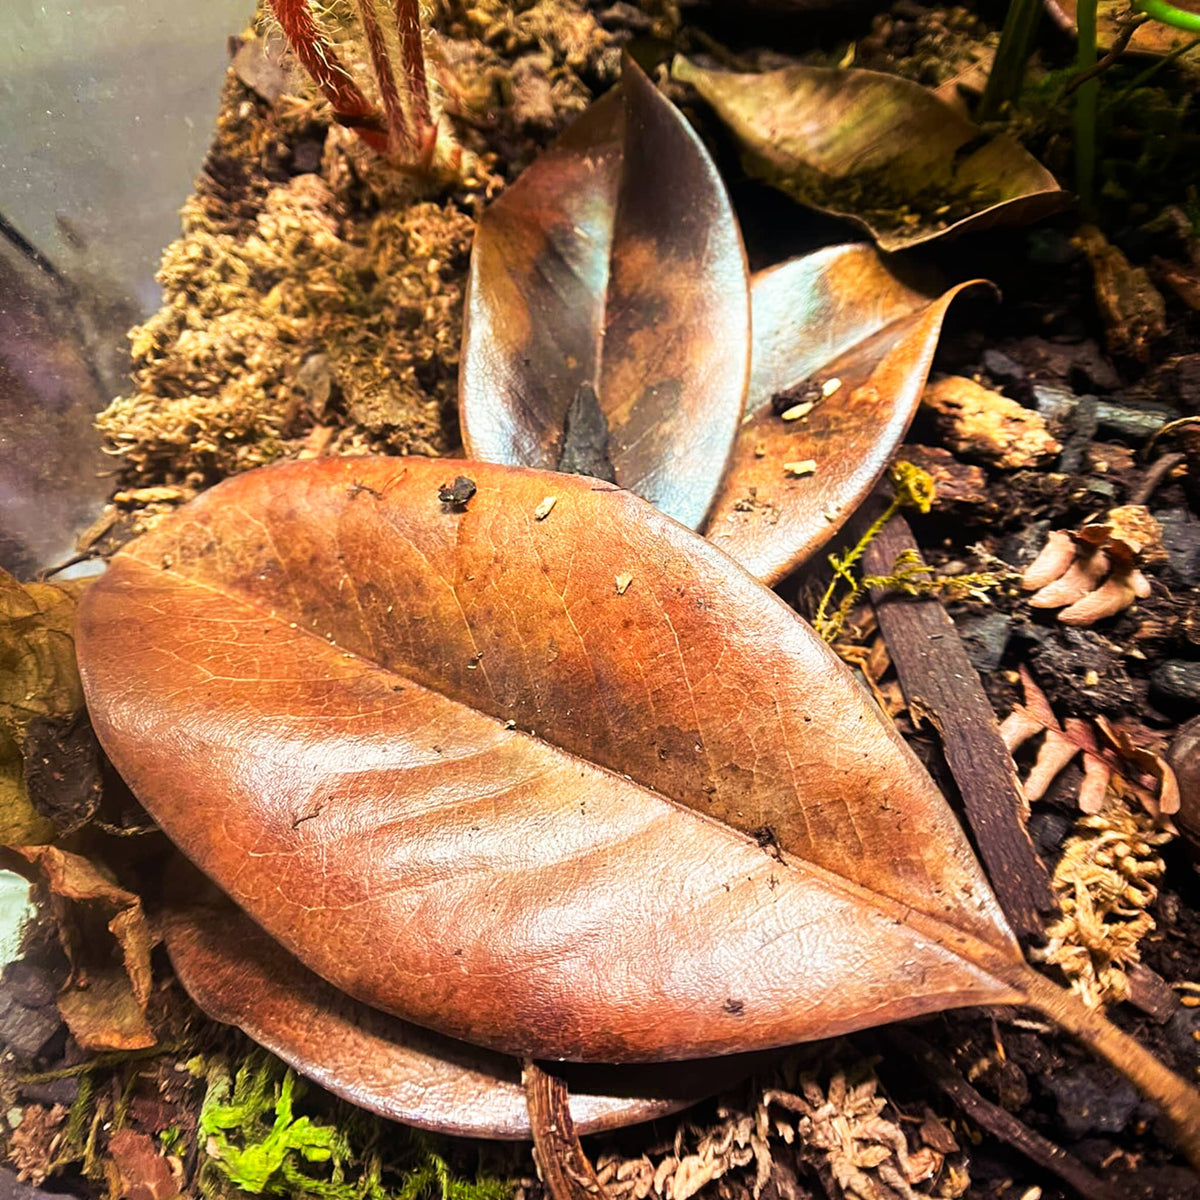 Brown southern magnolia leaf litter in a bioactive enclosure for crested geckos.